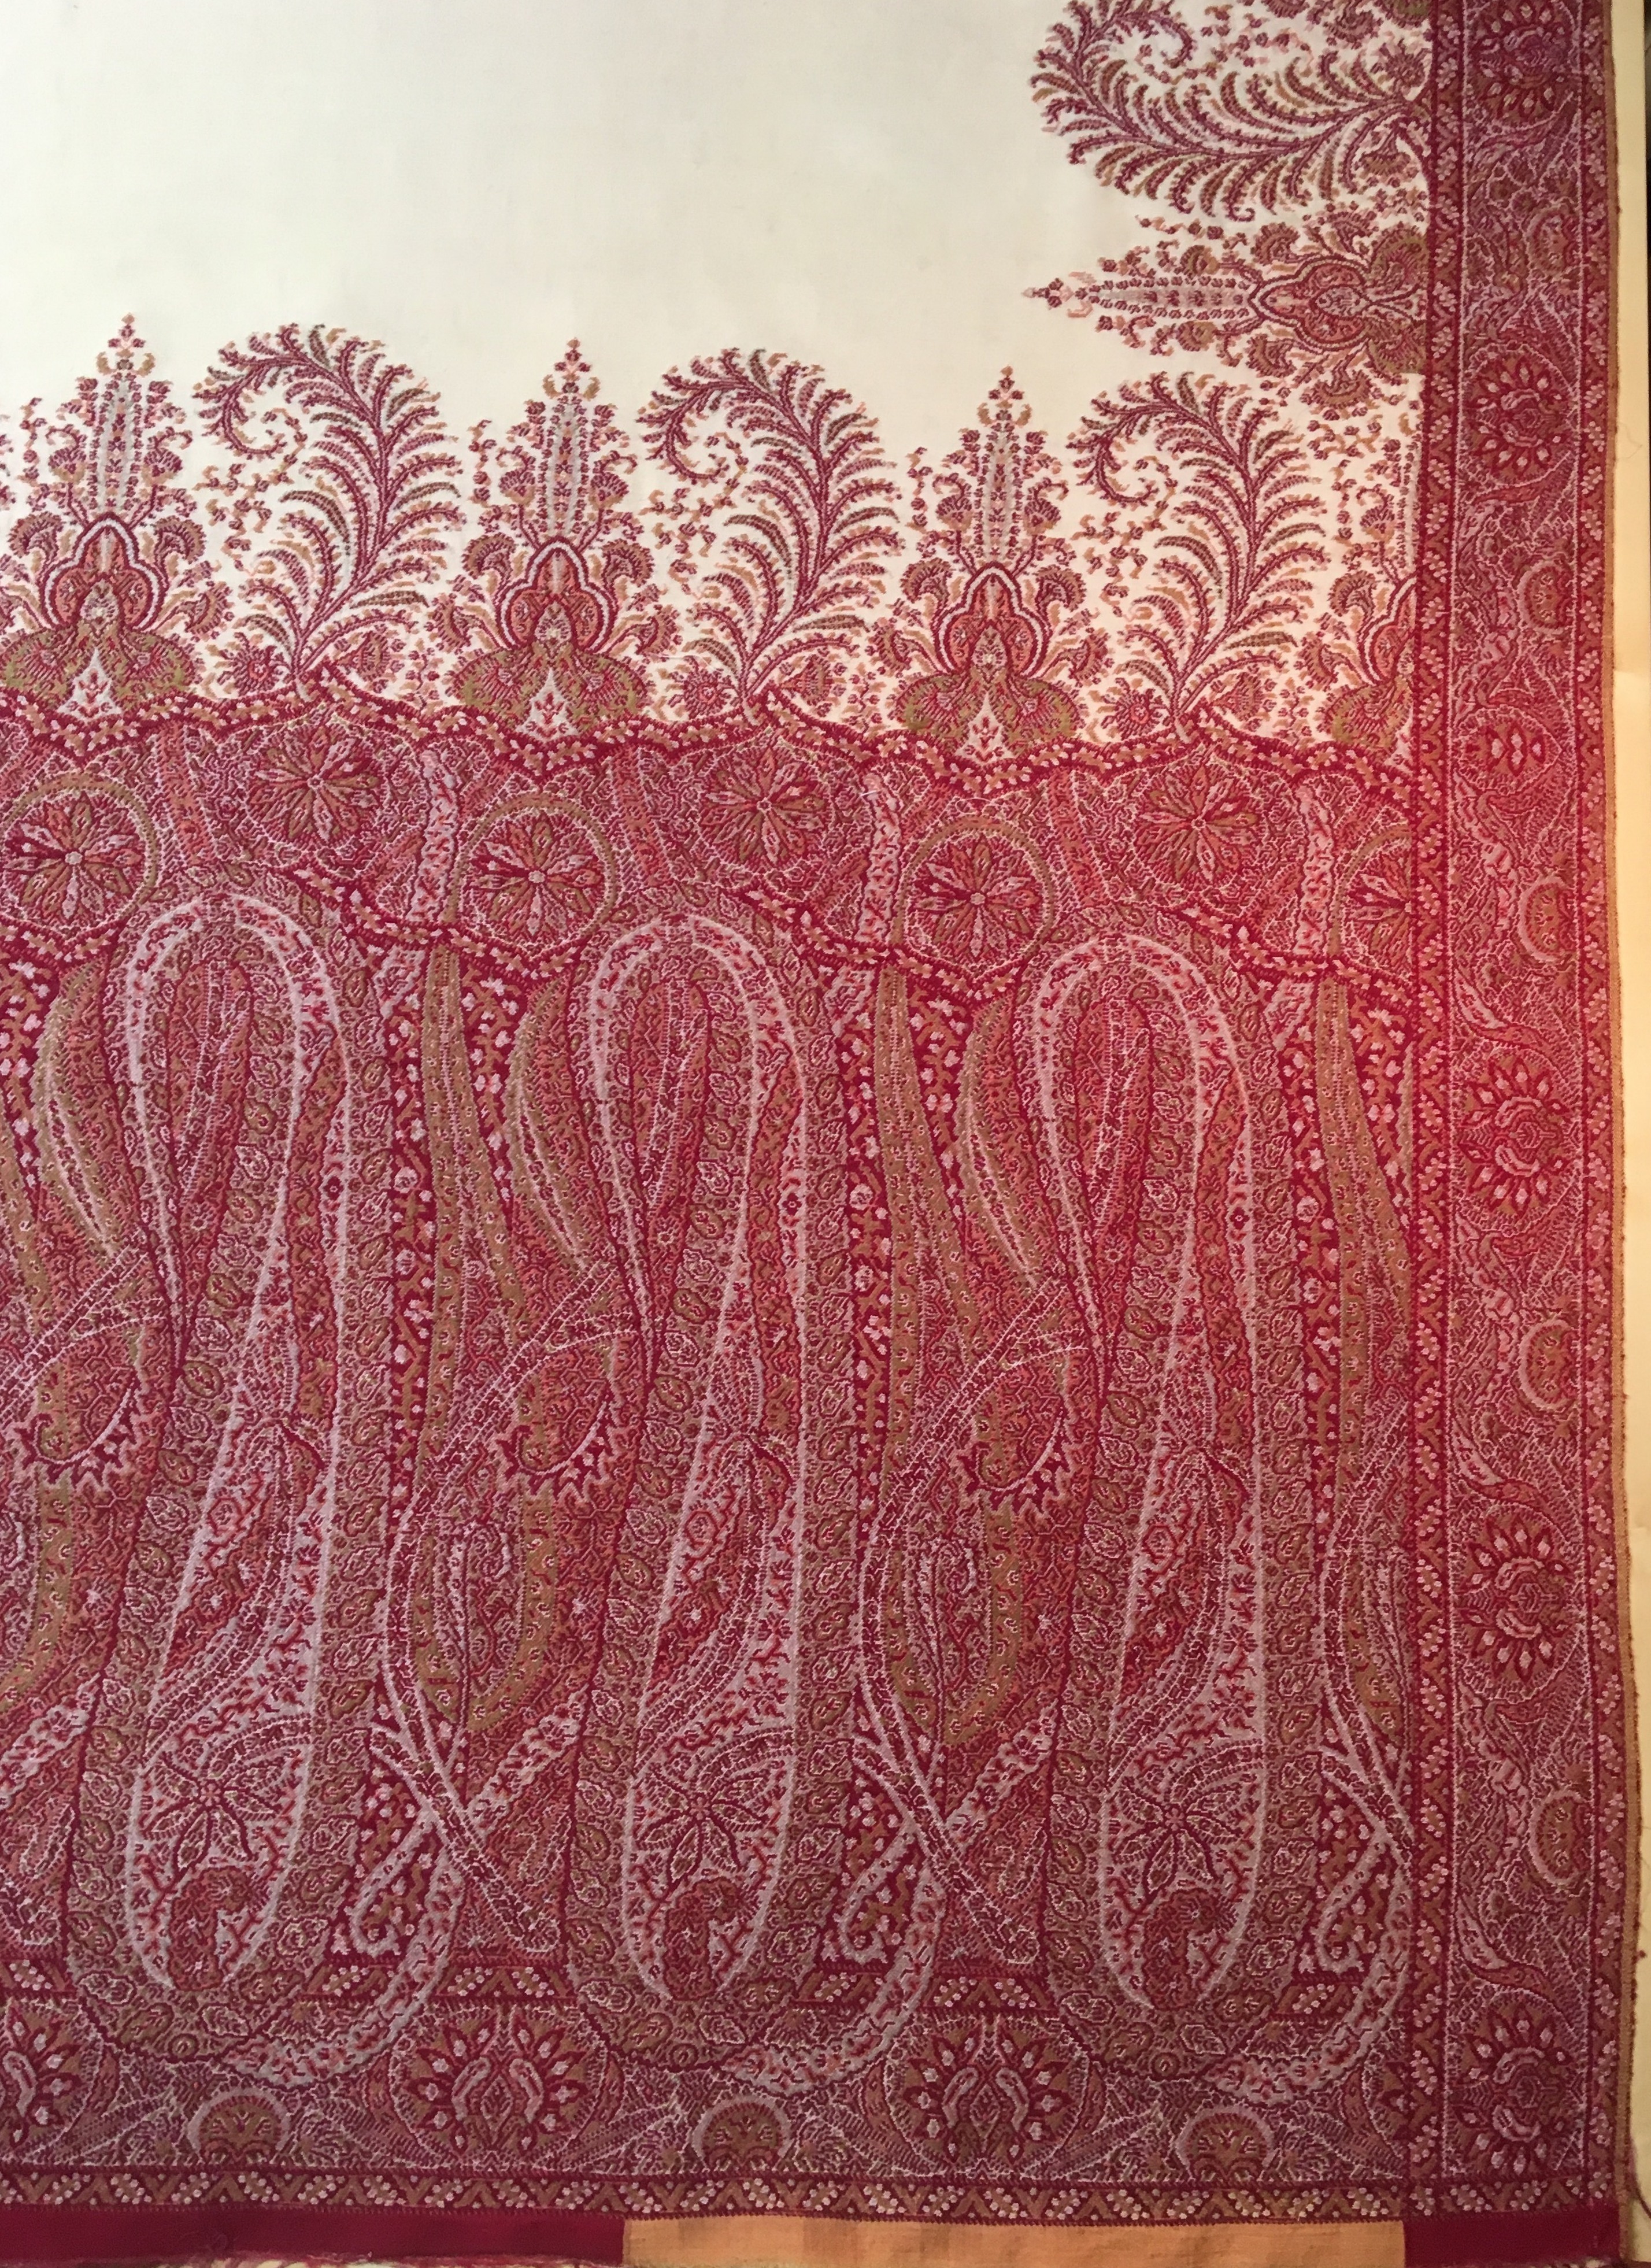 My French, wool and silk, jacquard woven shawl from the 1830s, 306 x 154 cm